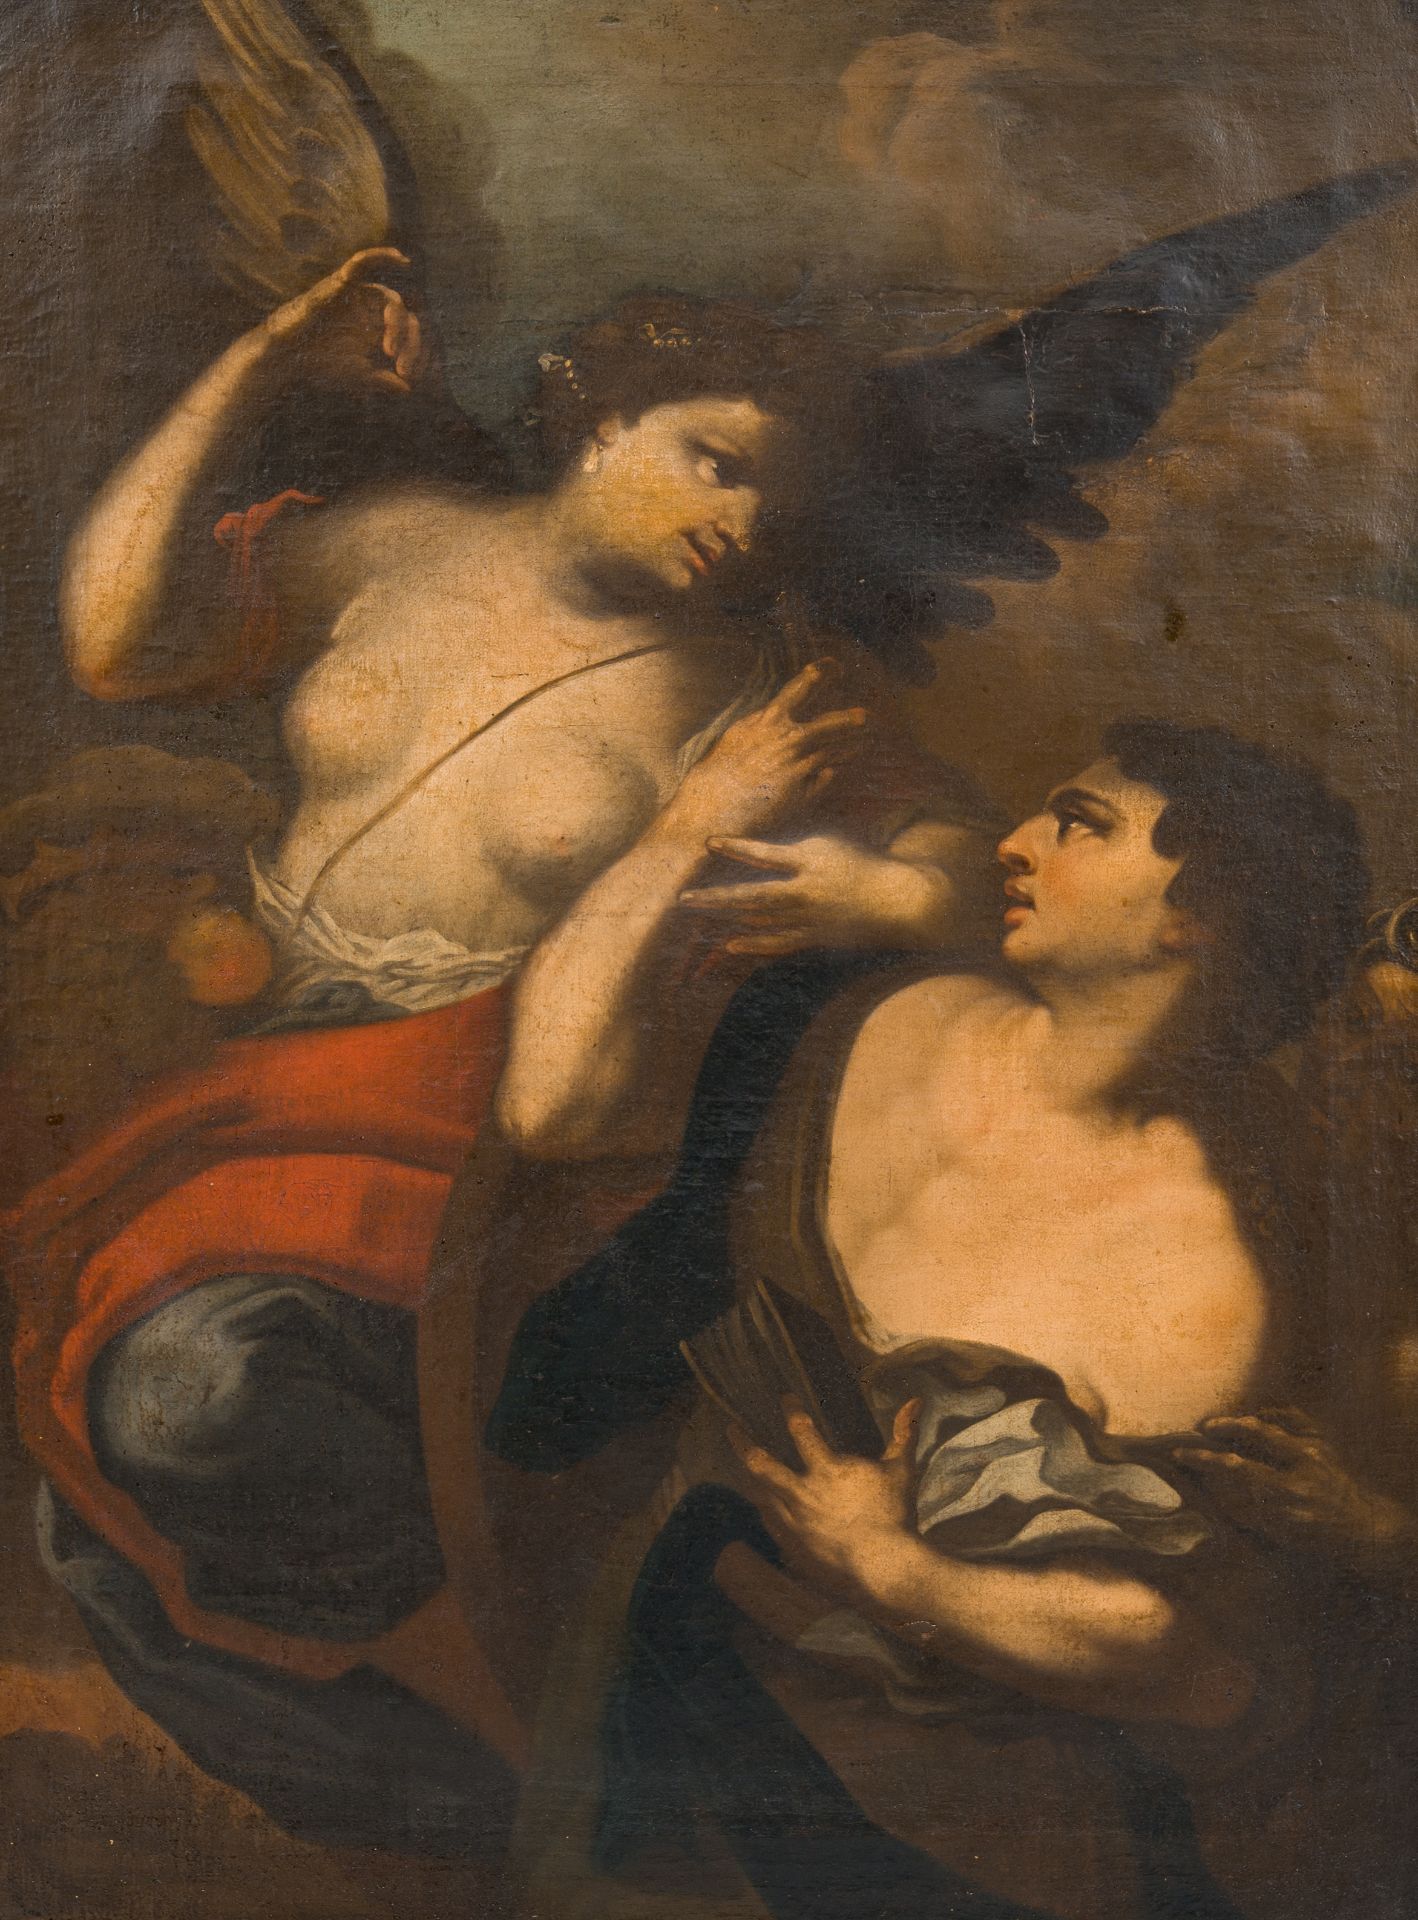 Johann Georg BergmÃ¼ller (1688-1762, attributed to): Tobias and the angel, oil on canvas